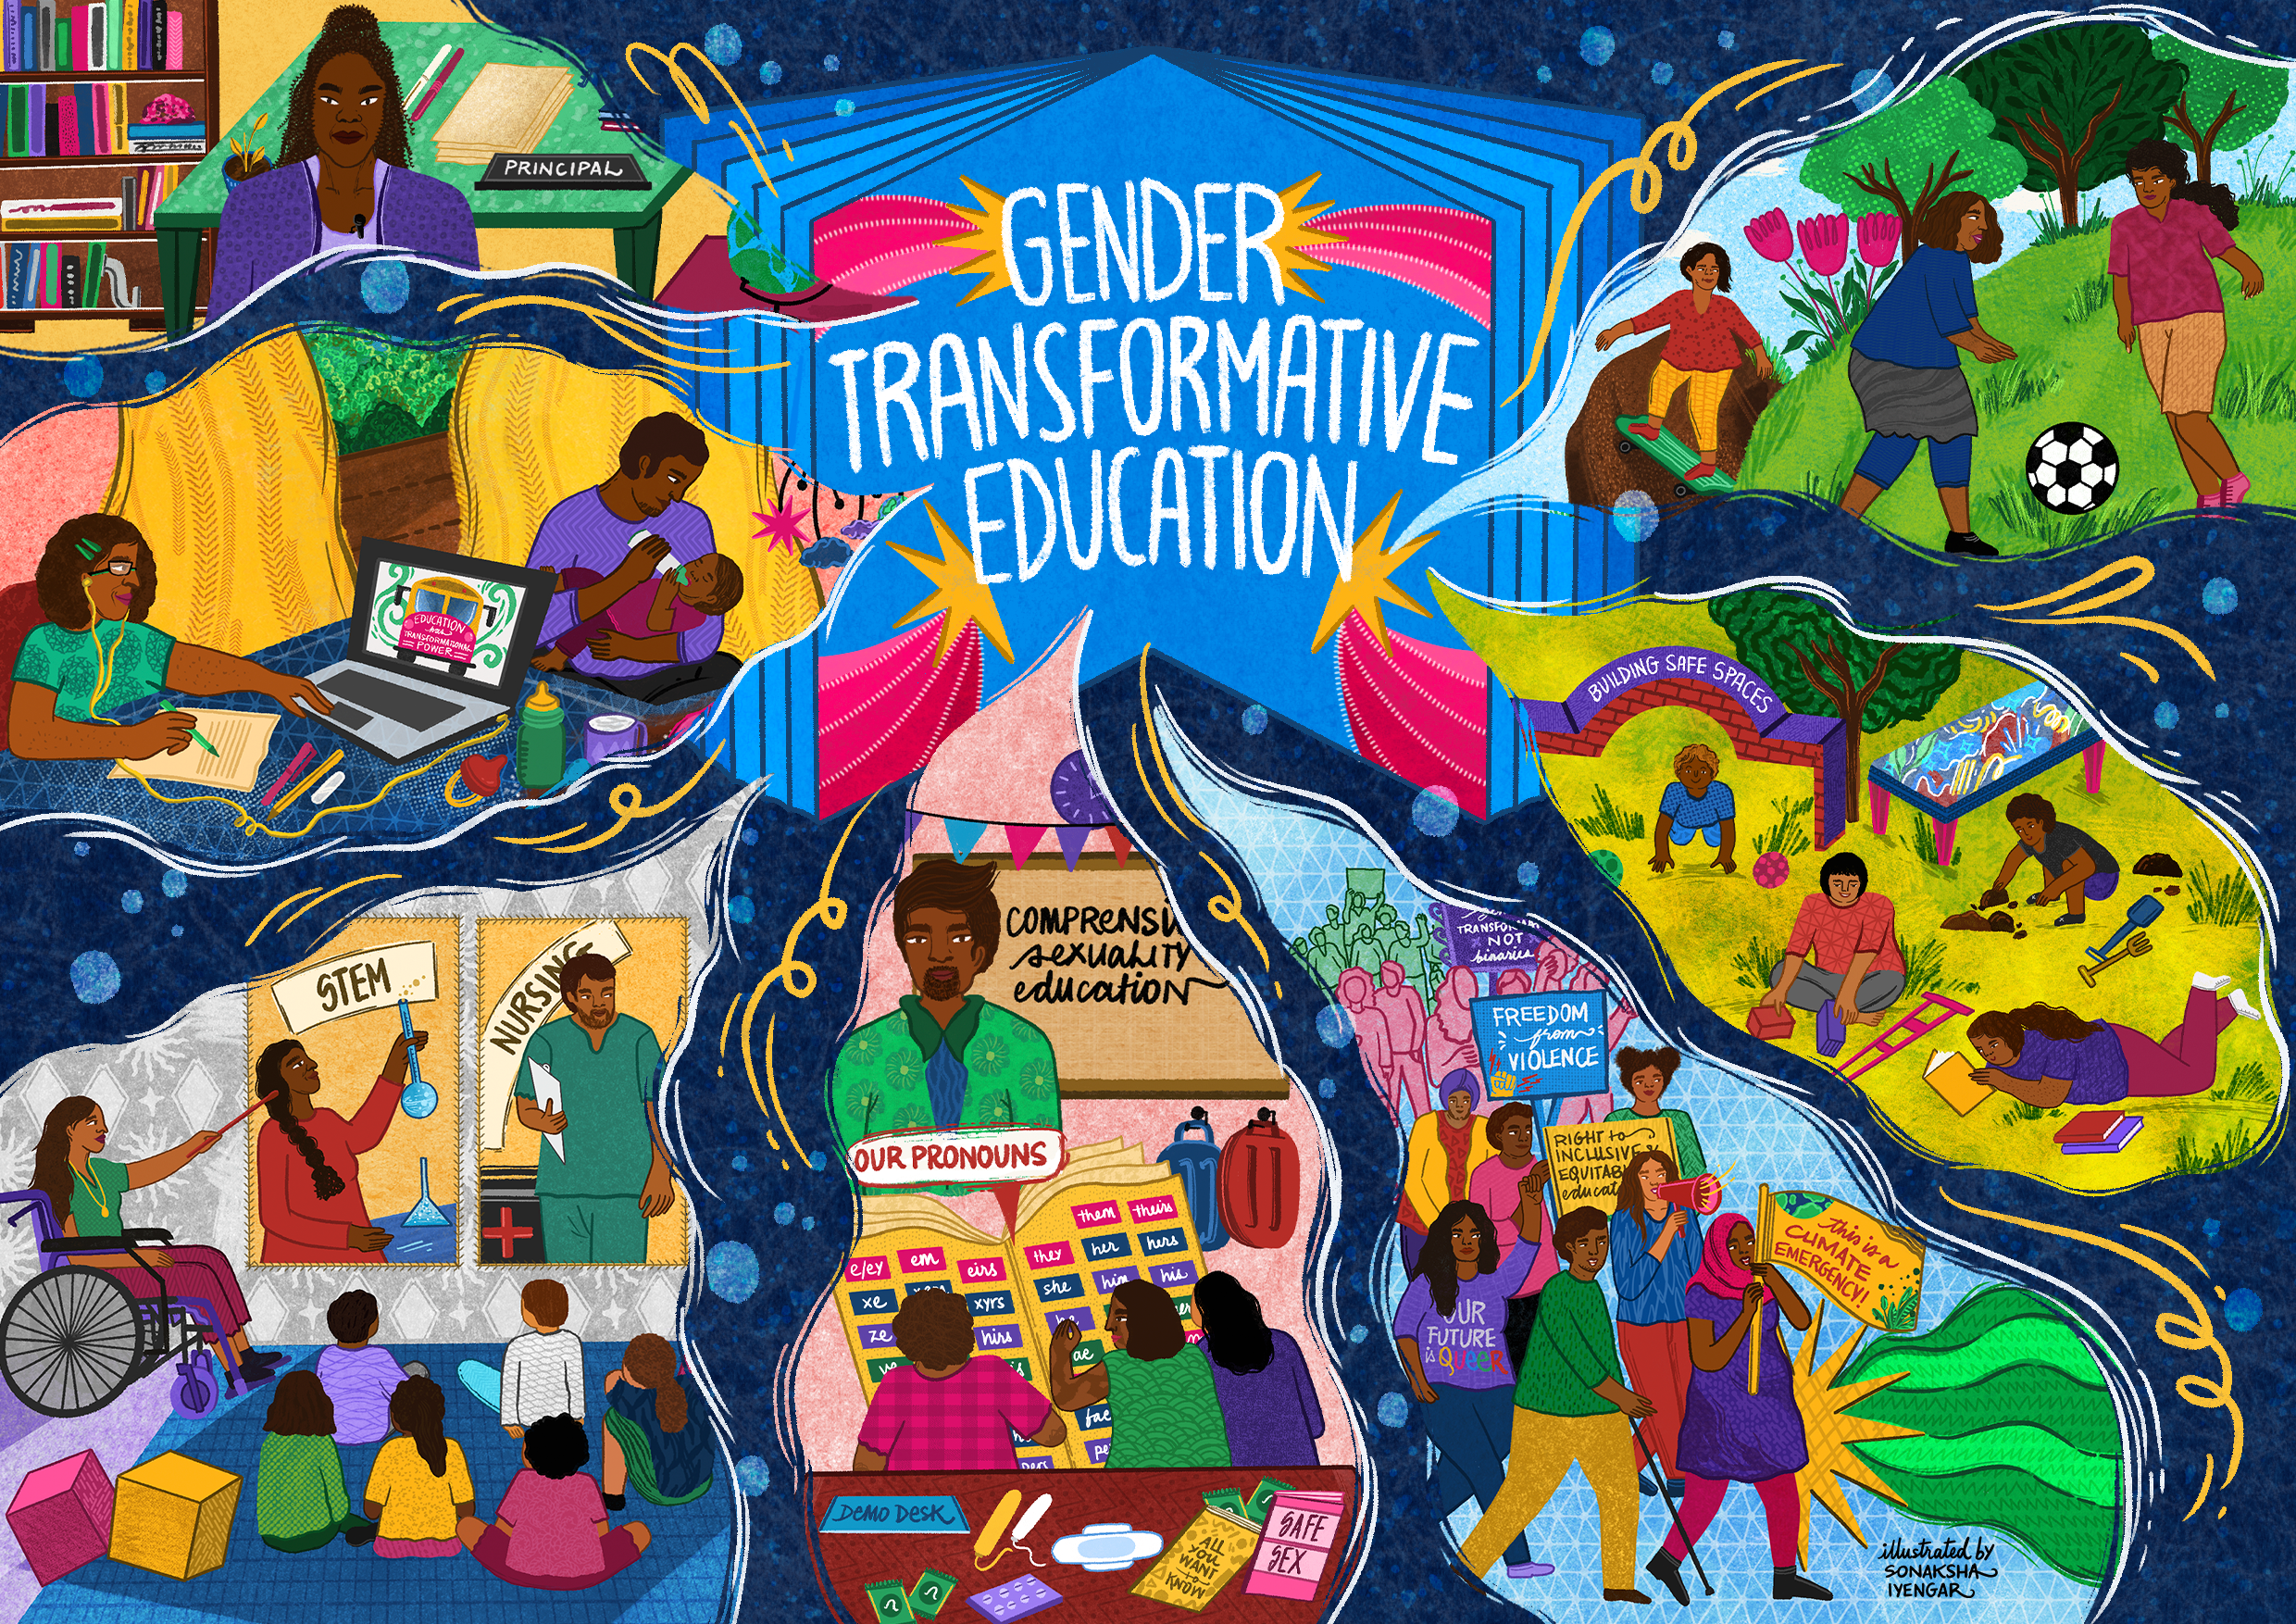 Young feminist illustrator Sonaksha Iyengar partnered with UNGEI, UNICEF and Plan International to create illustrations to depict Gender Transformative Education through art, as part of the brief. 